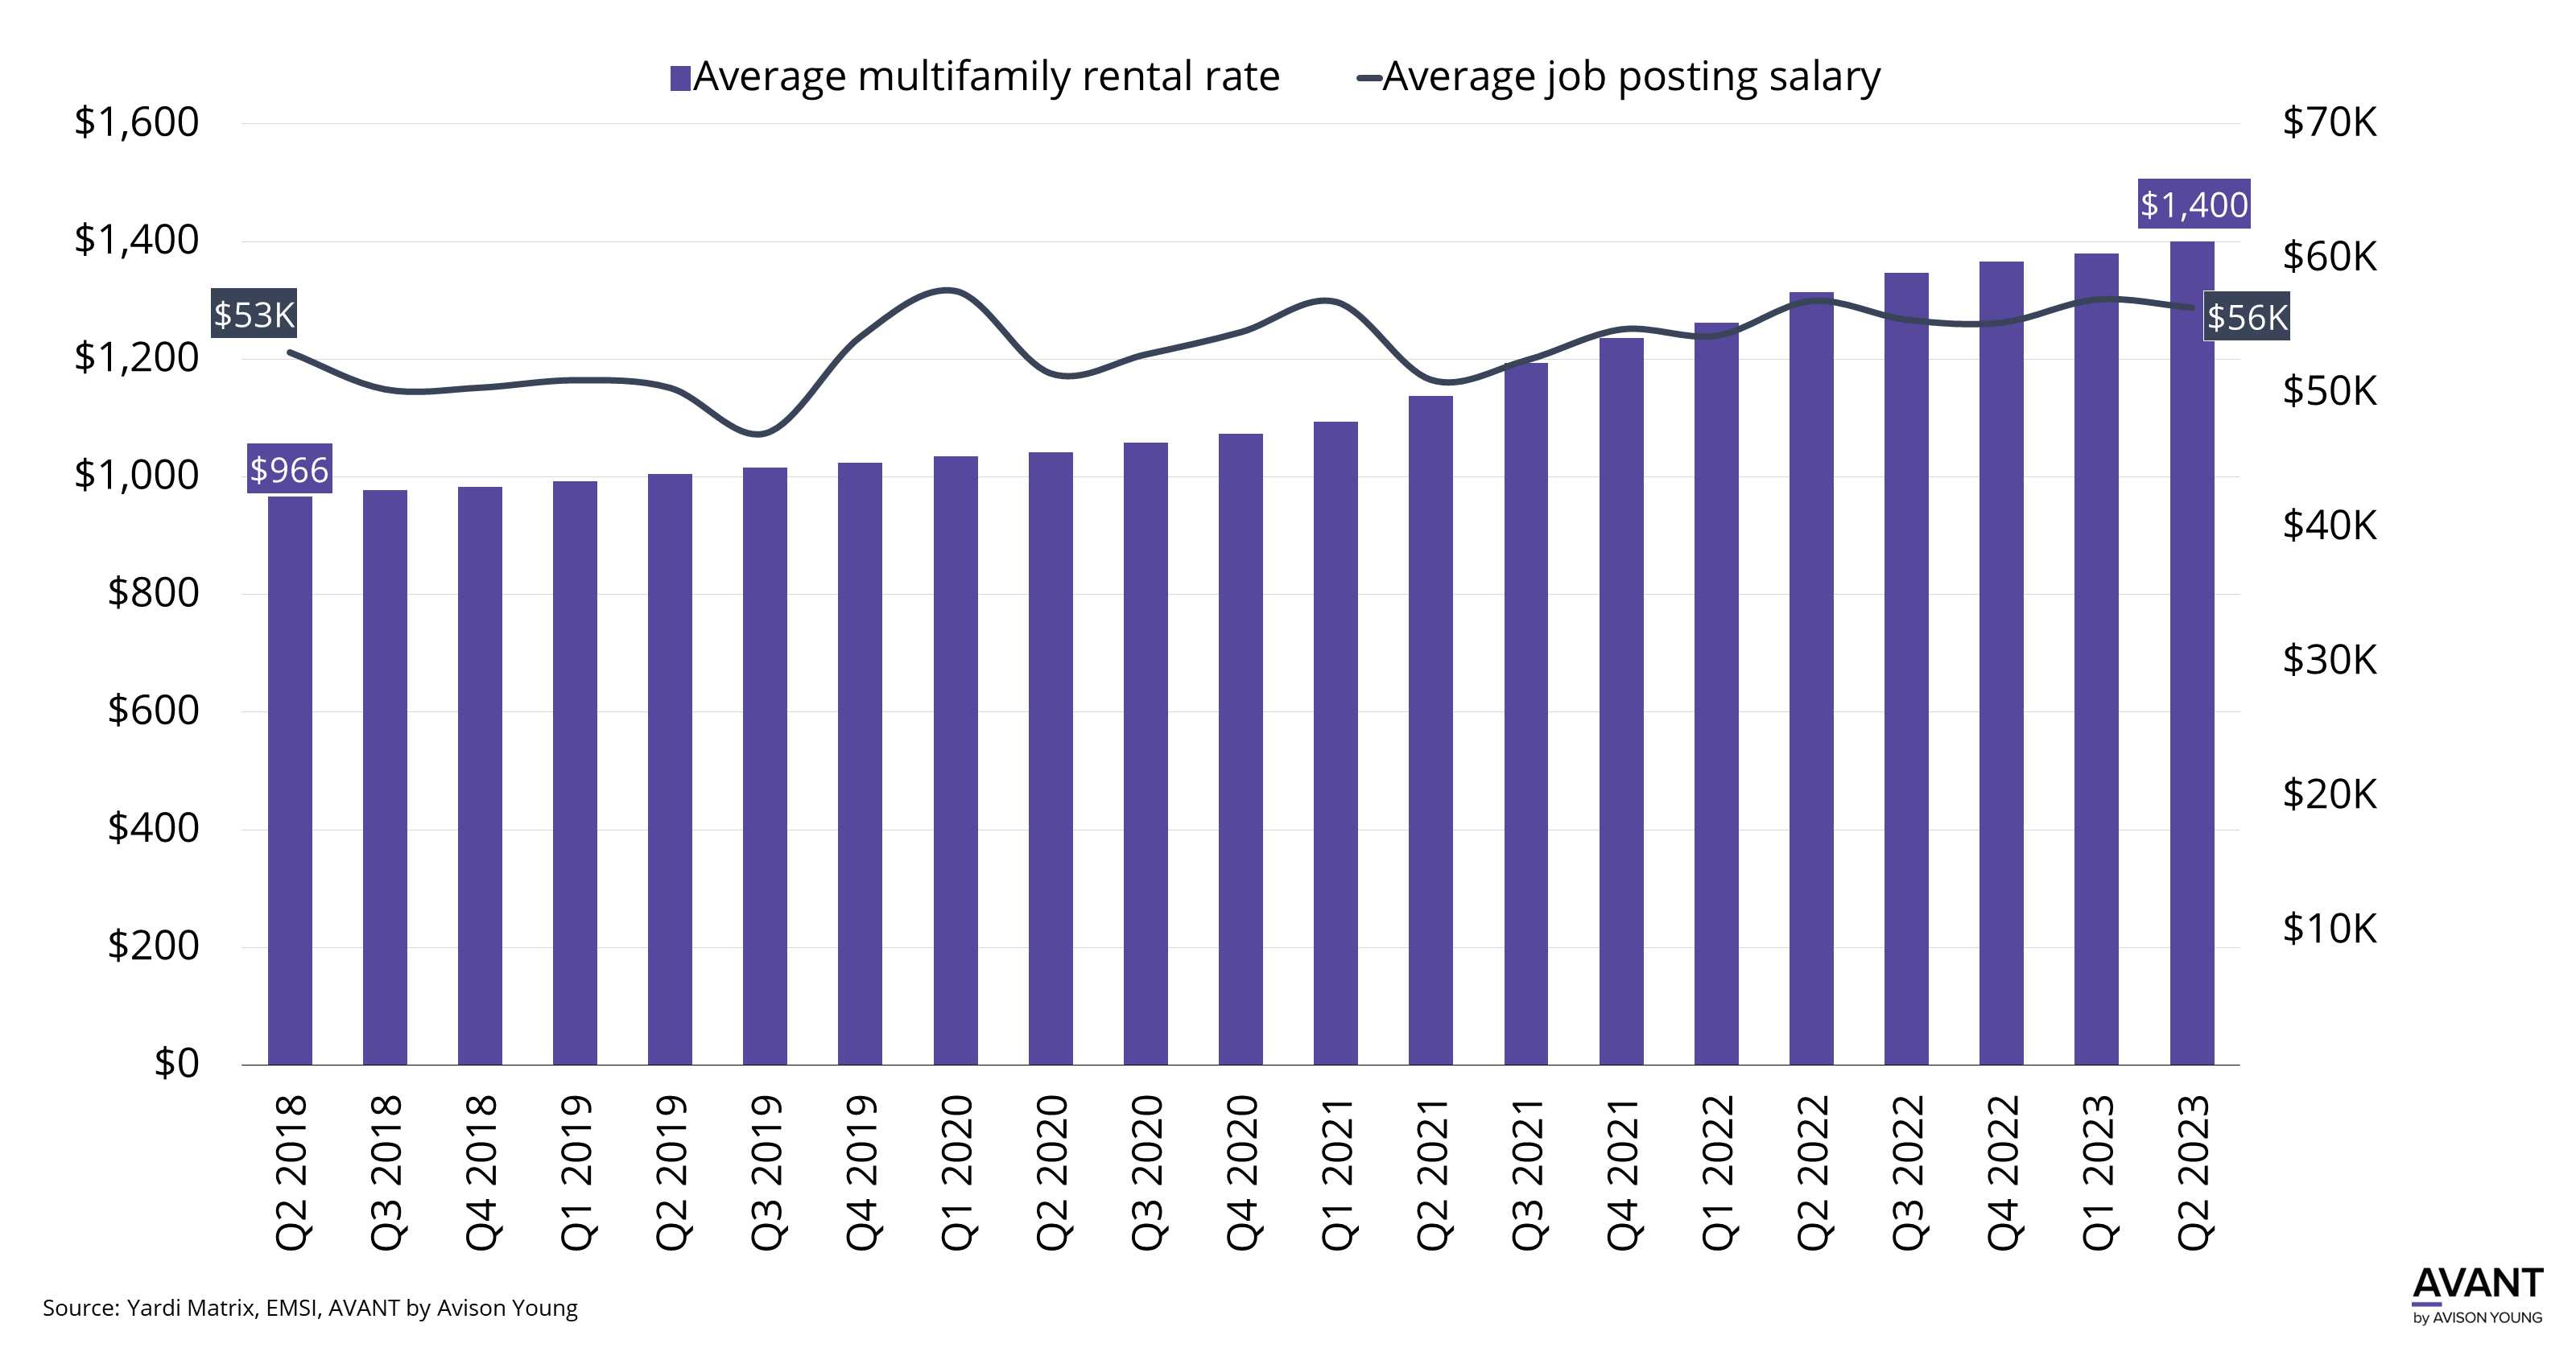 Average multifamily rental rate trend in Greenville from Q2 2018 to Q2 2023 compared to the average job posting salary.